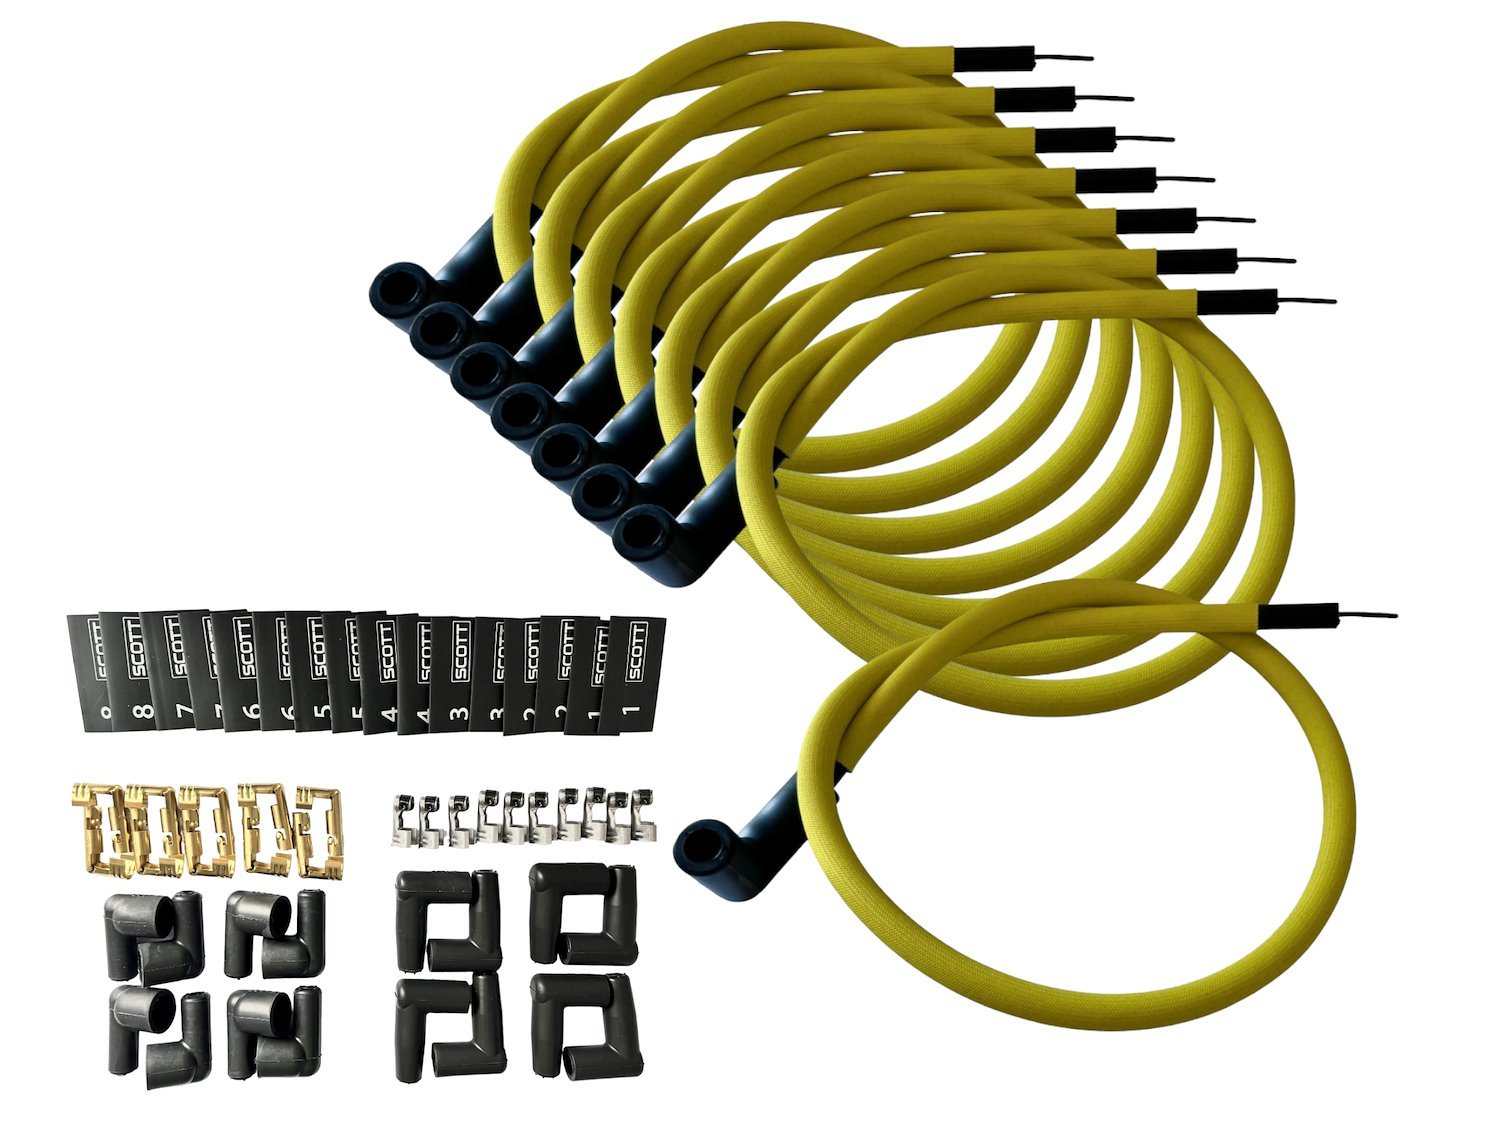 SPW-PS-K90-5 DIY High-Performance Fiberglass-Oversleeved Spark Plug Wire Set for DIY Kits, 90-Degree Boot [Yellow]